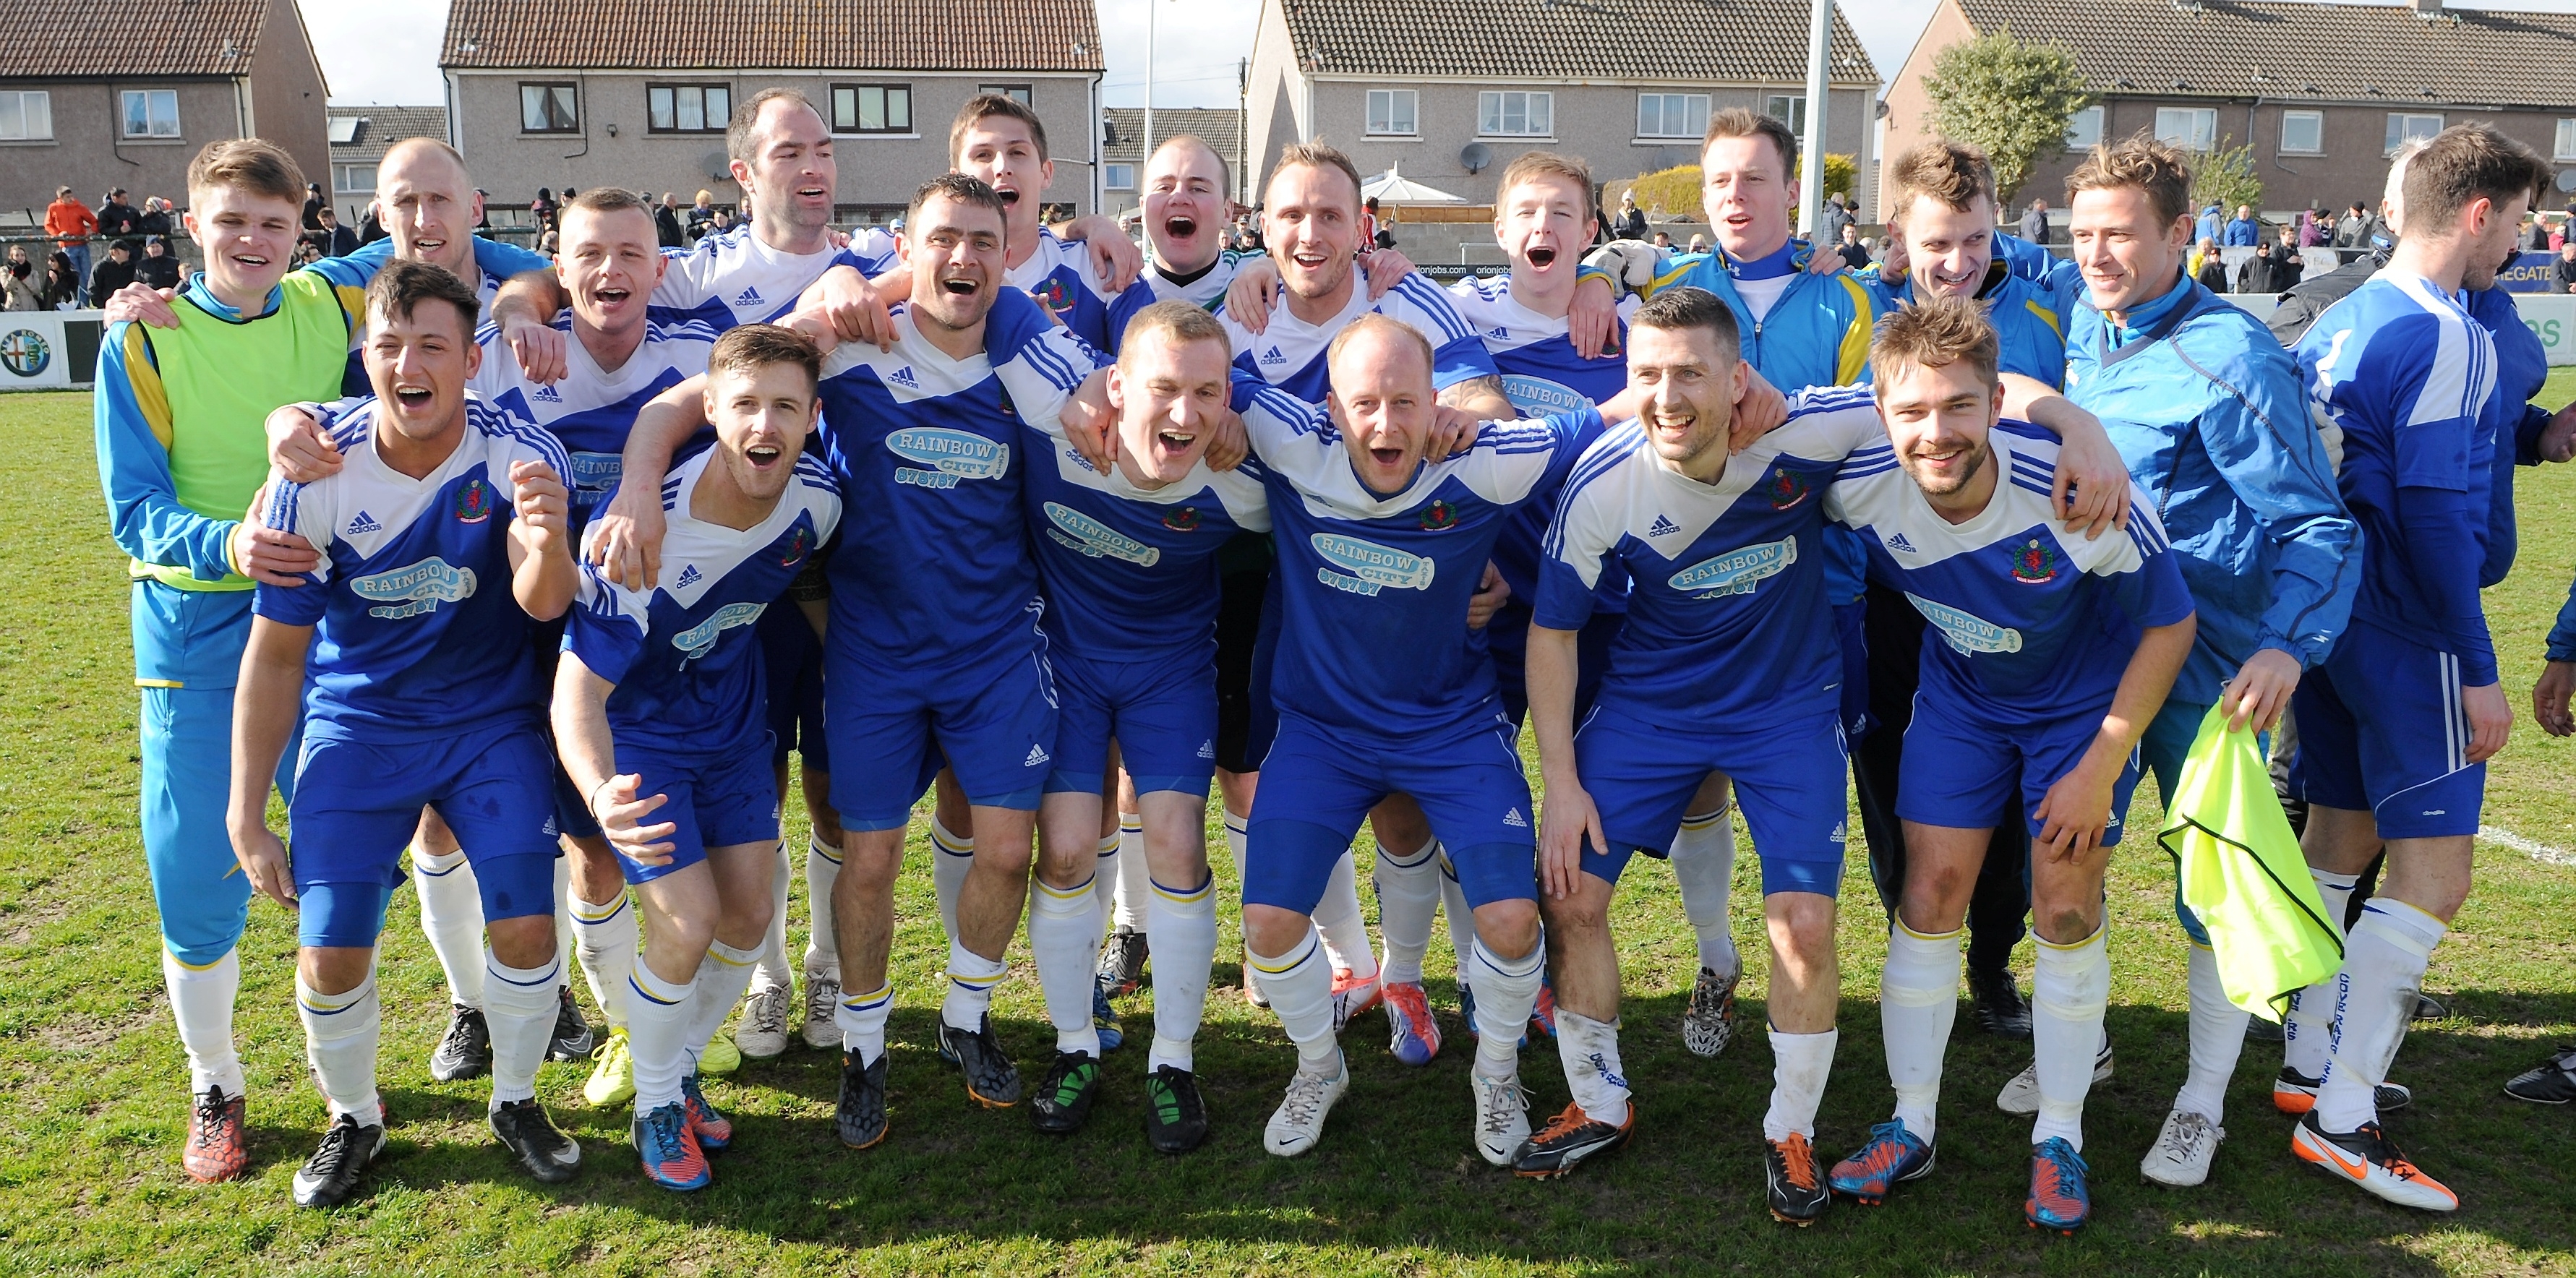 Cove celebrate their cup final victory